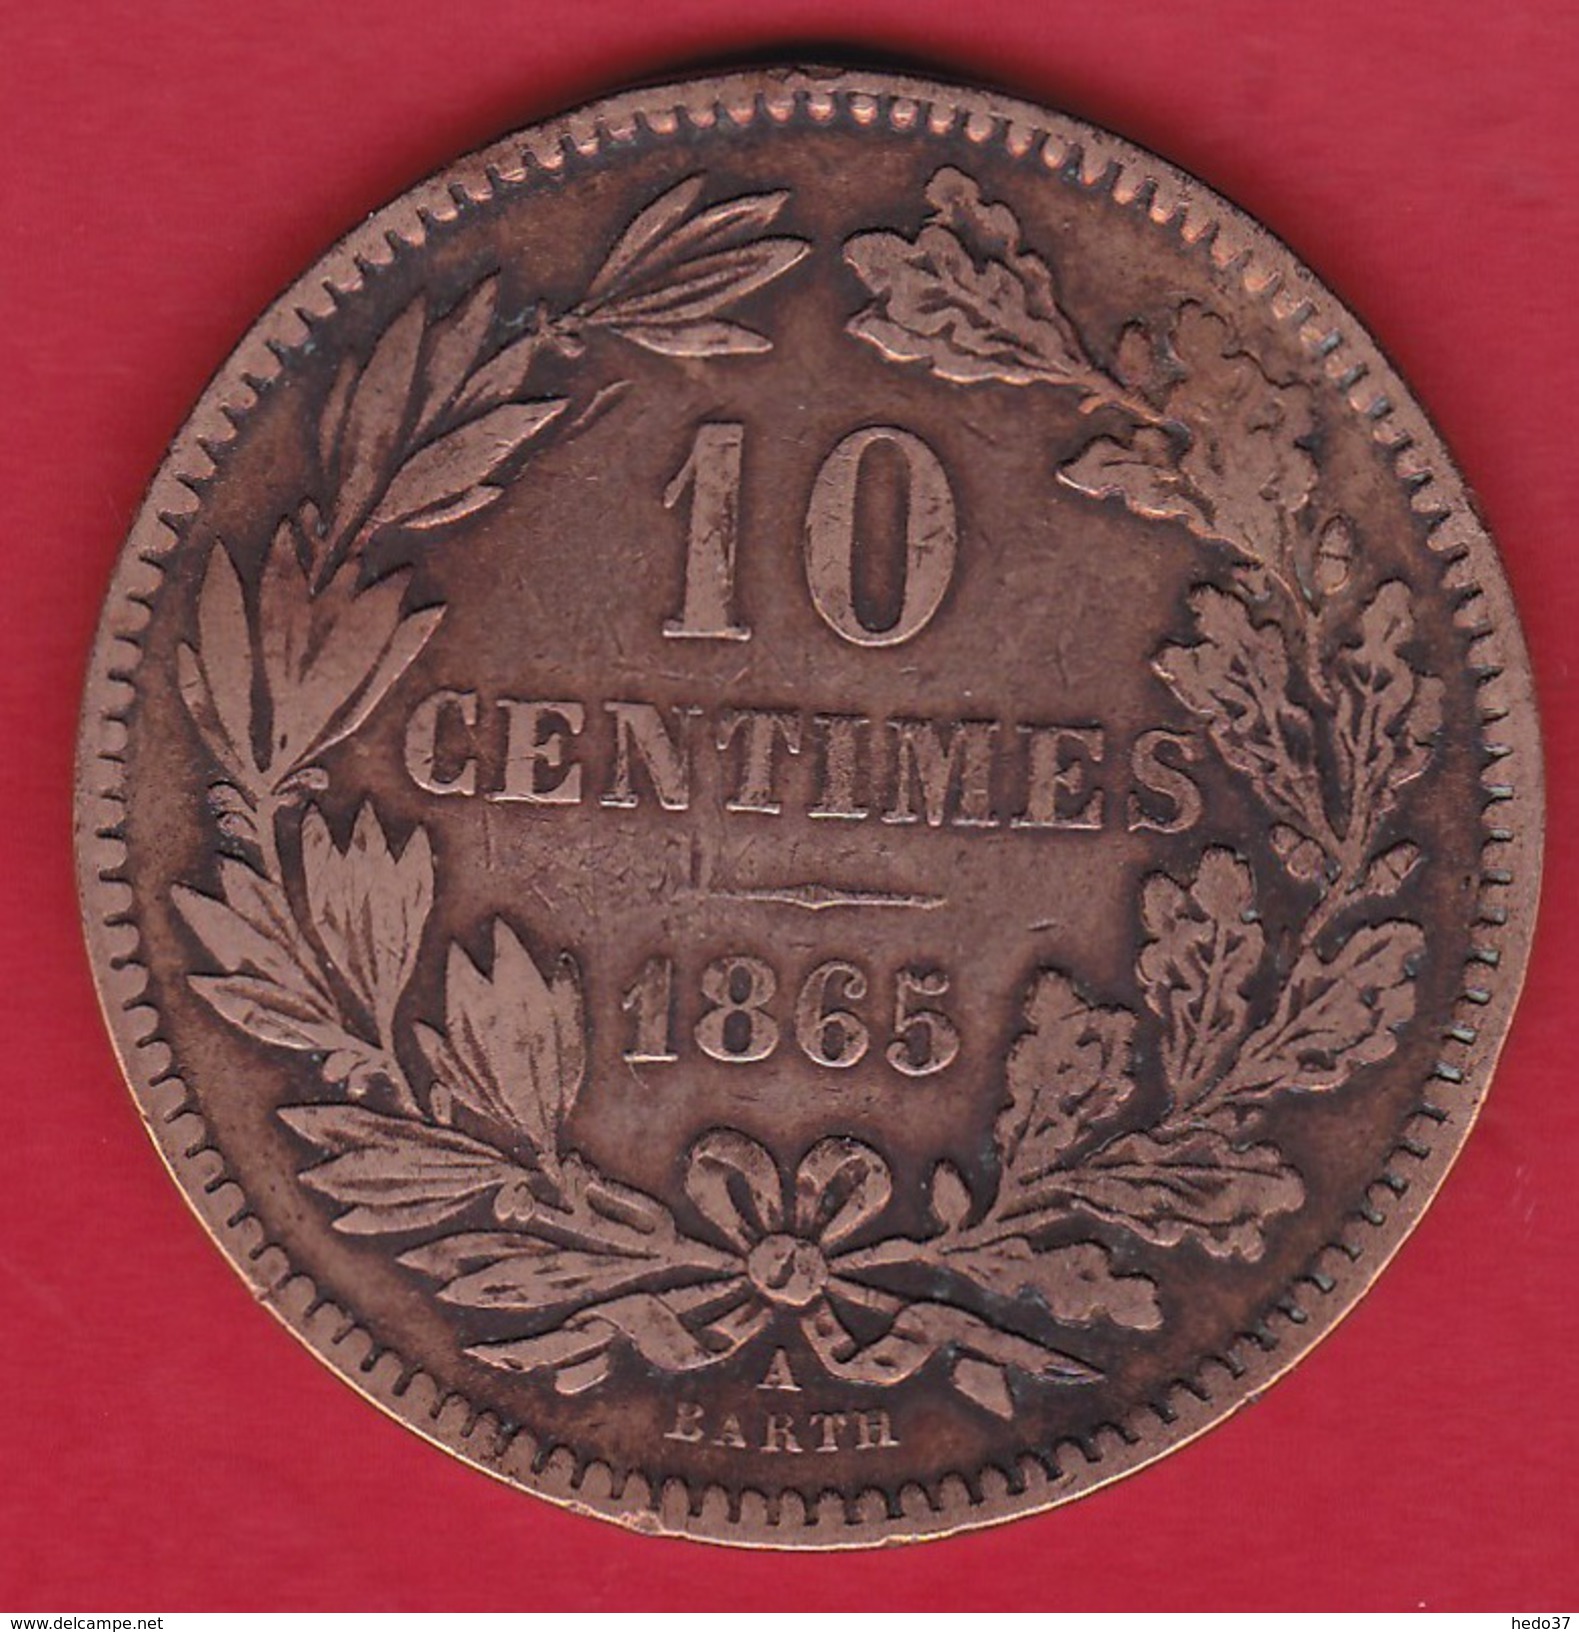 Luxembourg - 10 Centimes - 1865 - Luxembourg